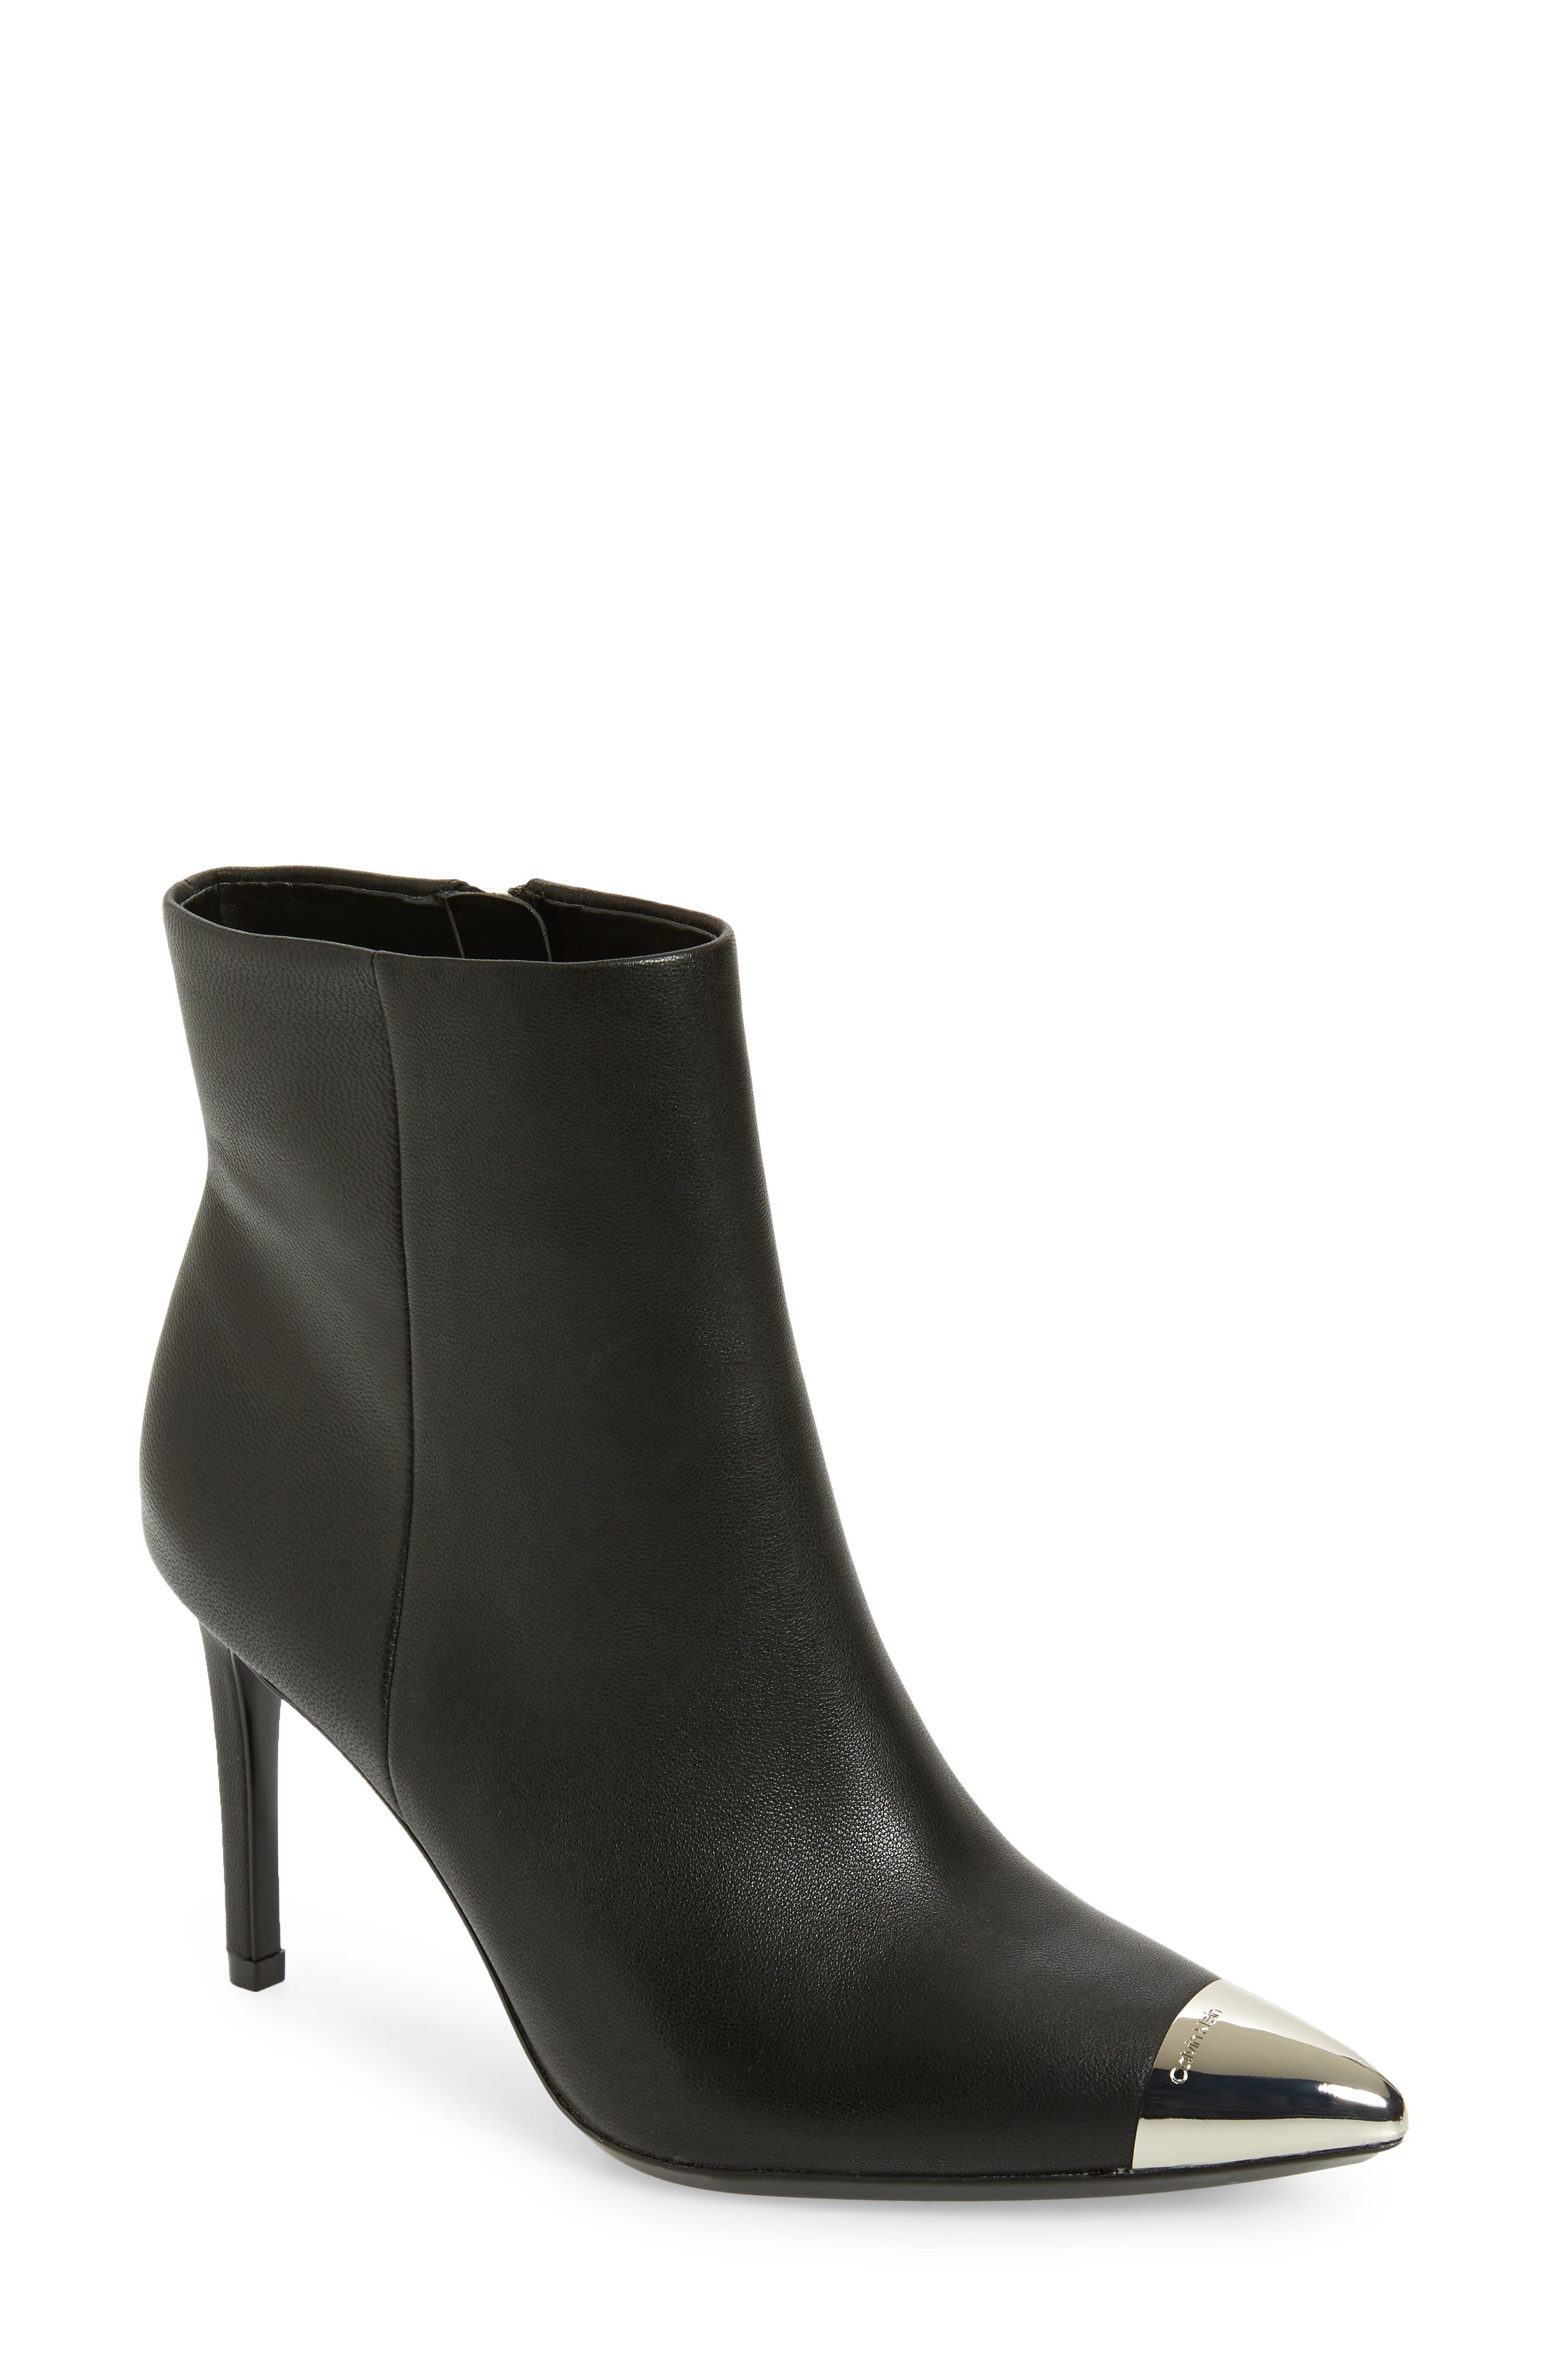 ck ankle boots